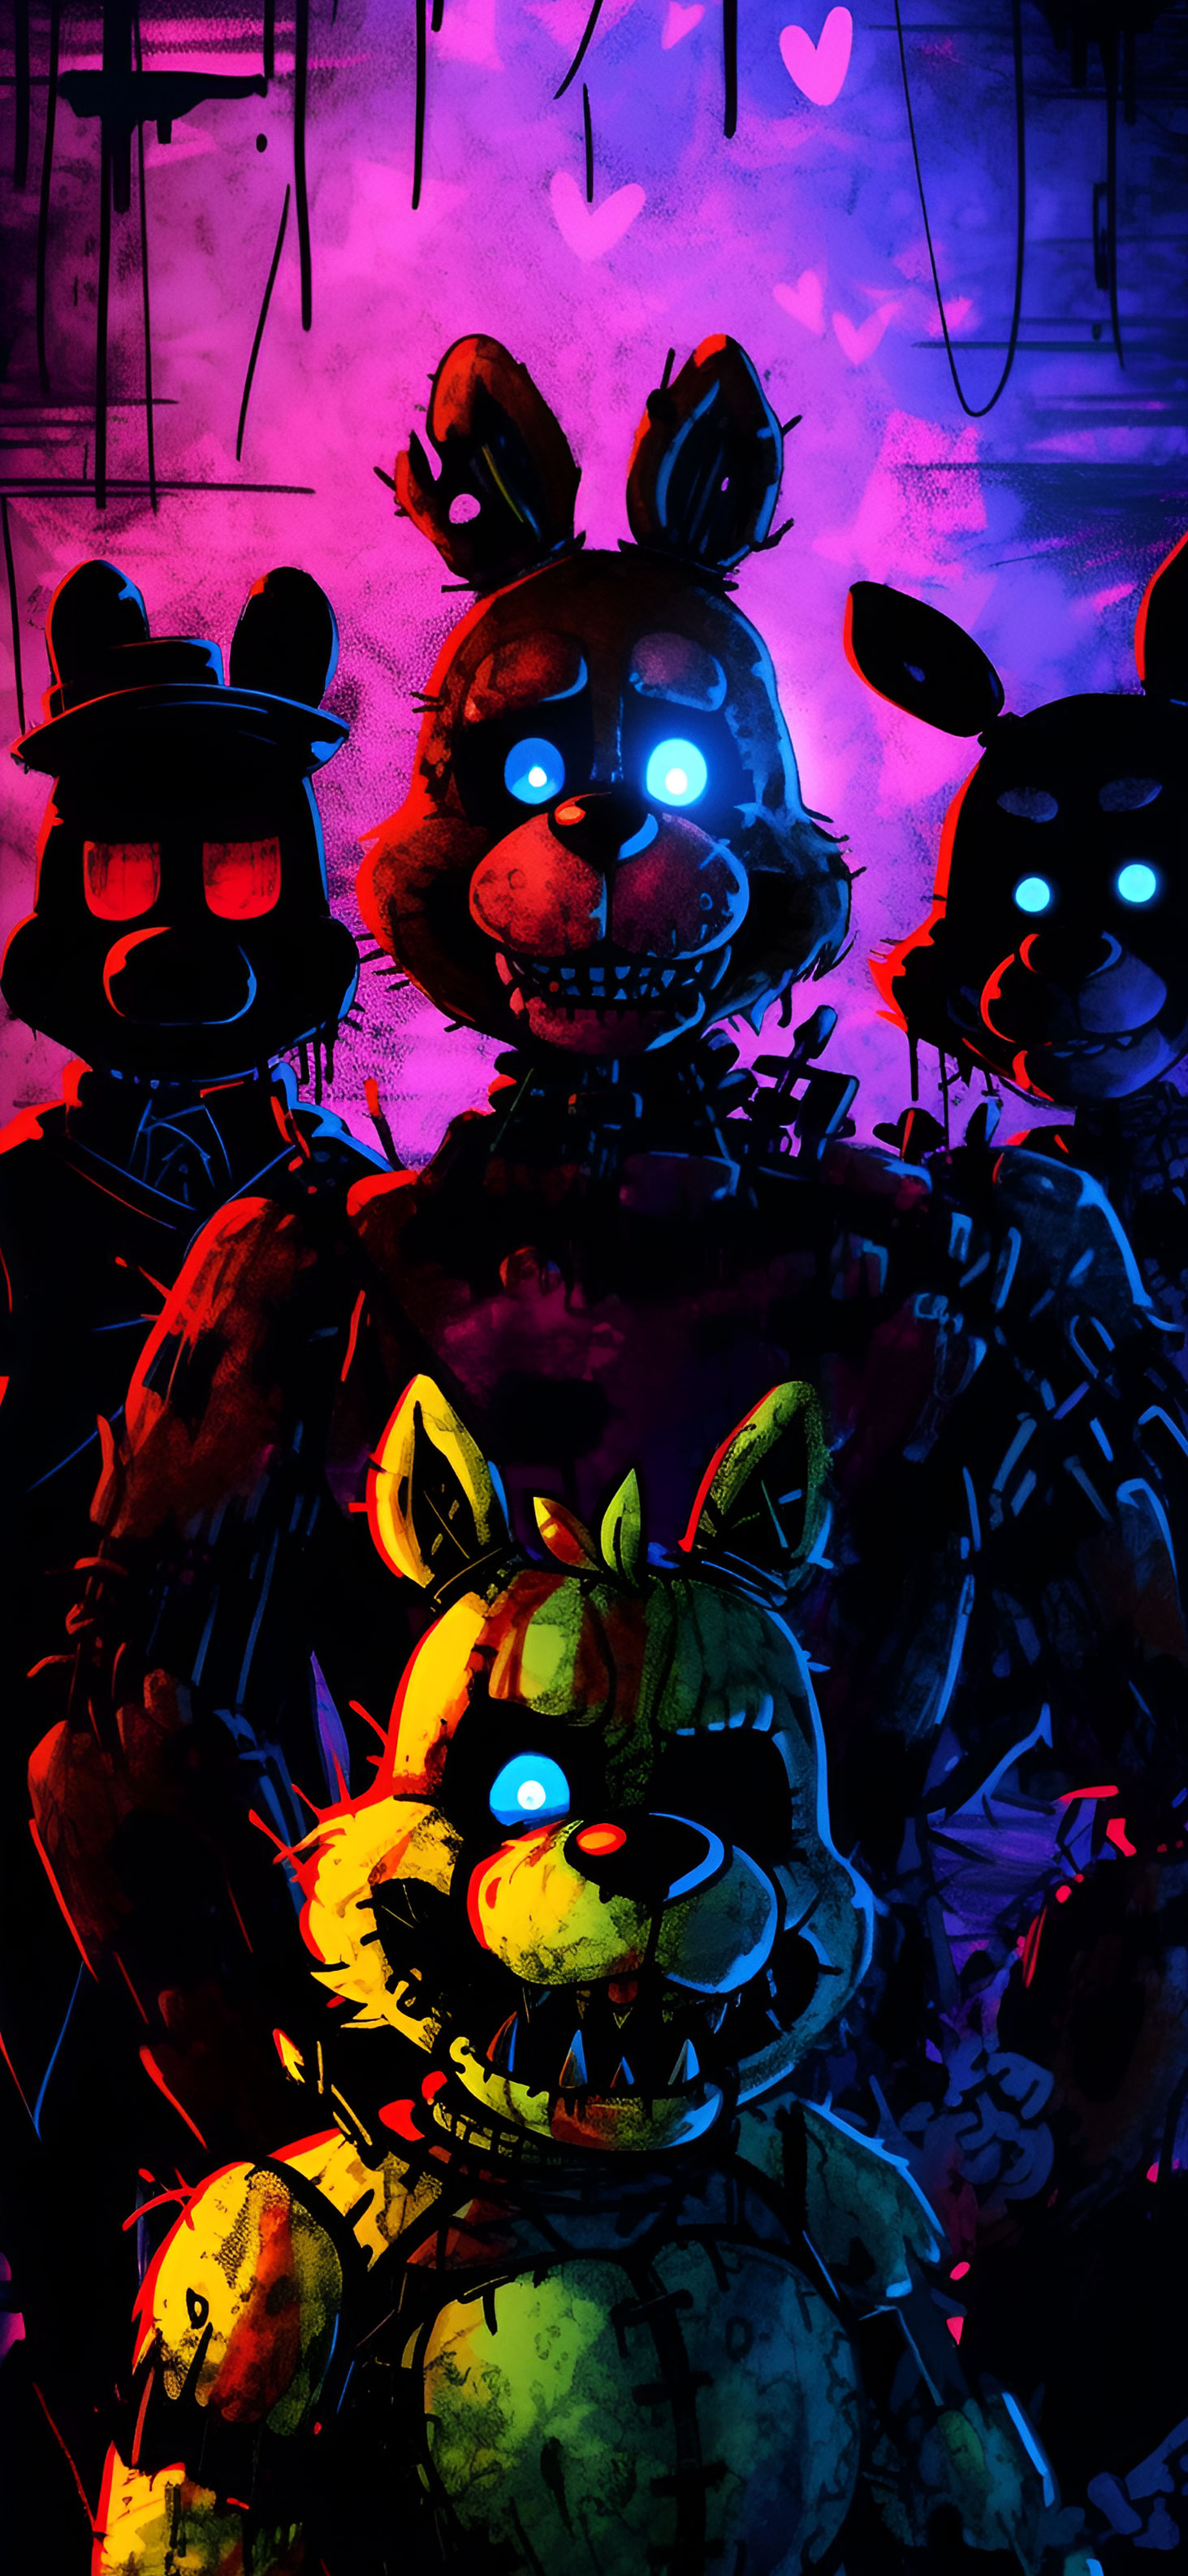 Download Five Nights At Freddy's wallpapers for mobile phone